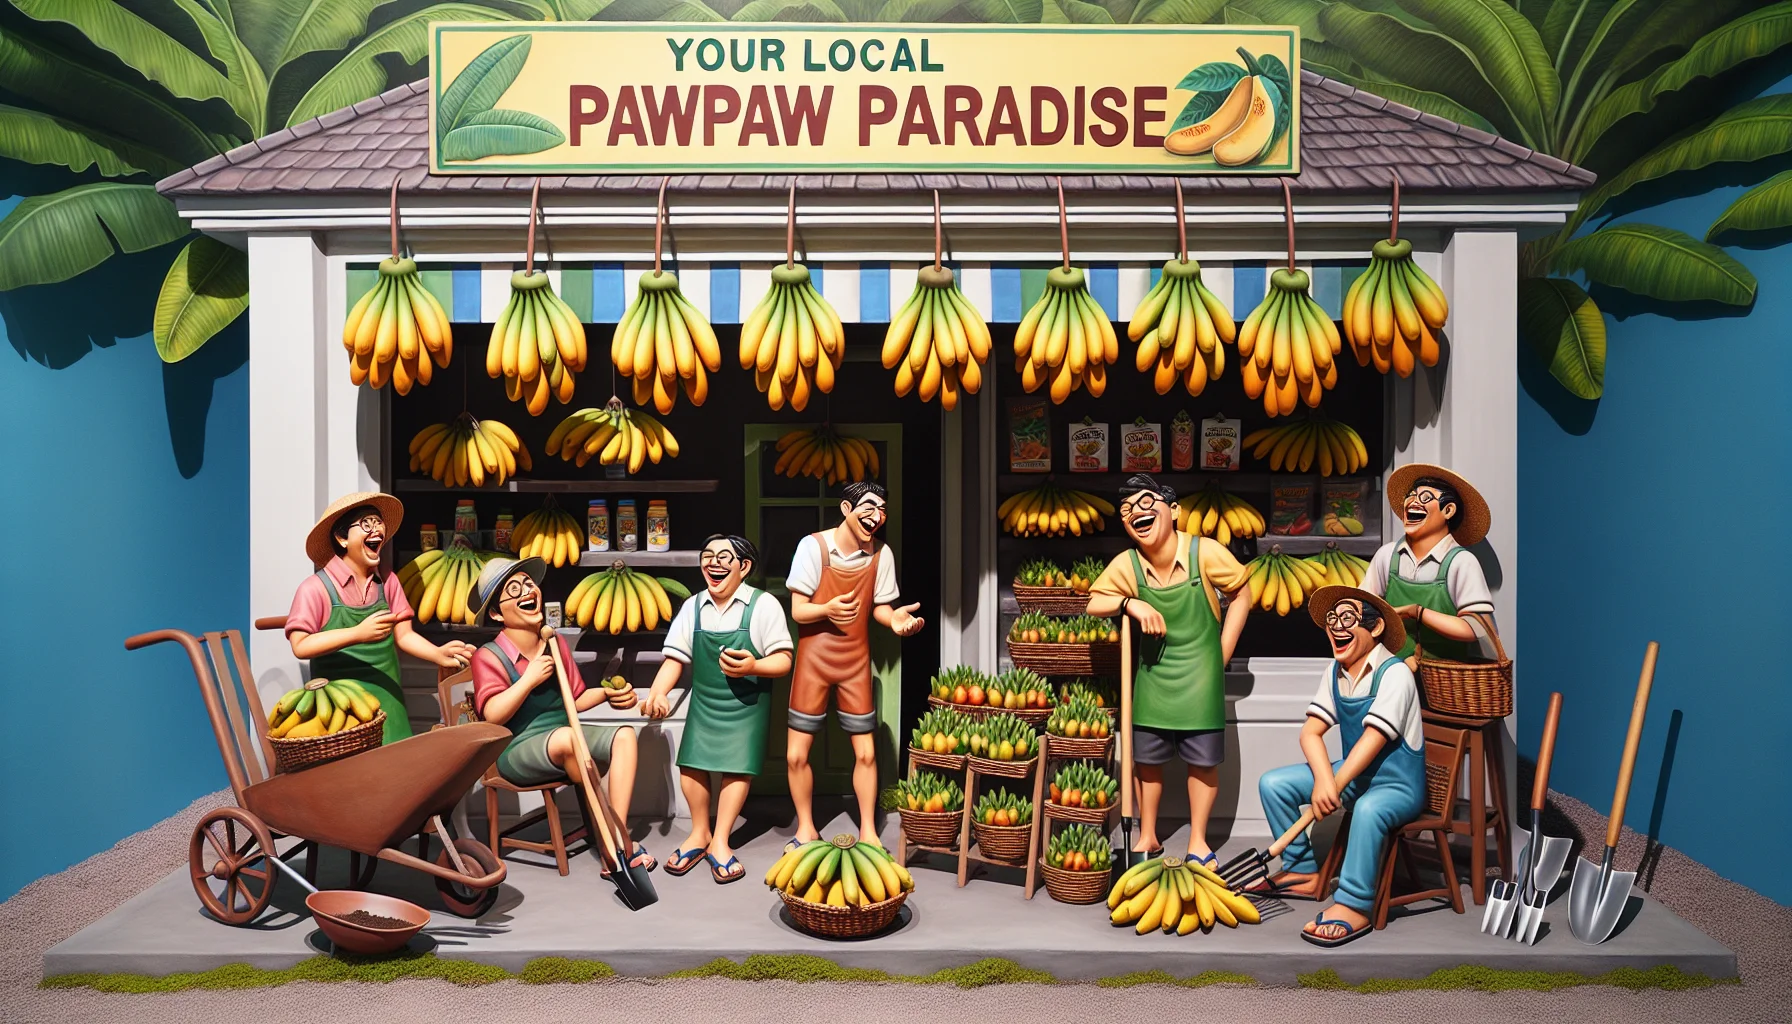 Show an illustrative image portraying the humorous scene of a quaint local fruit shop, teeming with ripe pawpaw fruits in banana-like clusters hanging from the display. Add to this the intriguing sight of a group of people from diverse descents, laughing and sharing a communal gardening experience on the side. Include details like trowels, fruit baskets, and gardening hats. The signboard of the shop should read 'Your Local Pawpaw Paradise' and the ambience filled with a friendly, jovial vibe enticing every viewer to join in on the gardening fun.